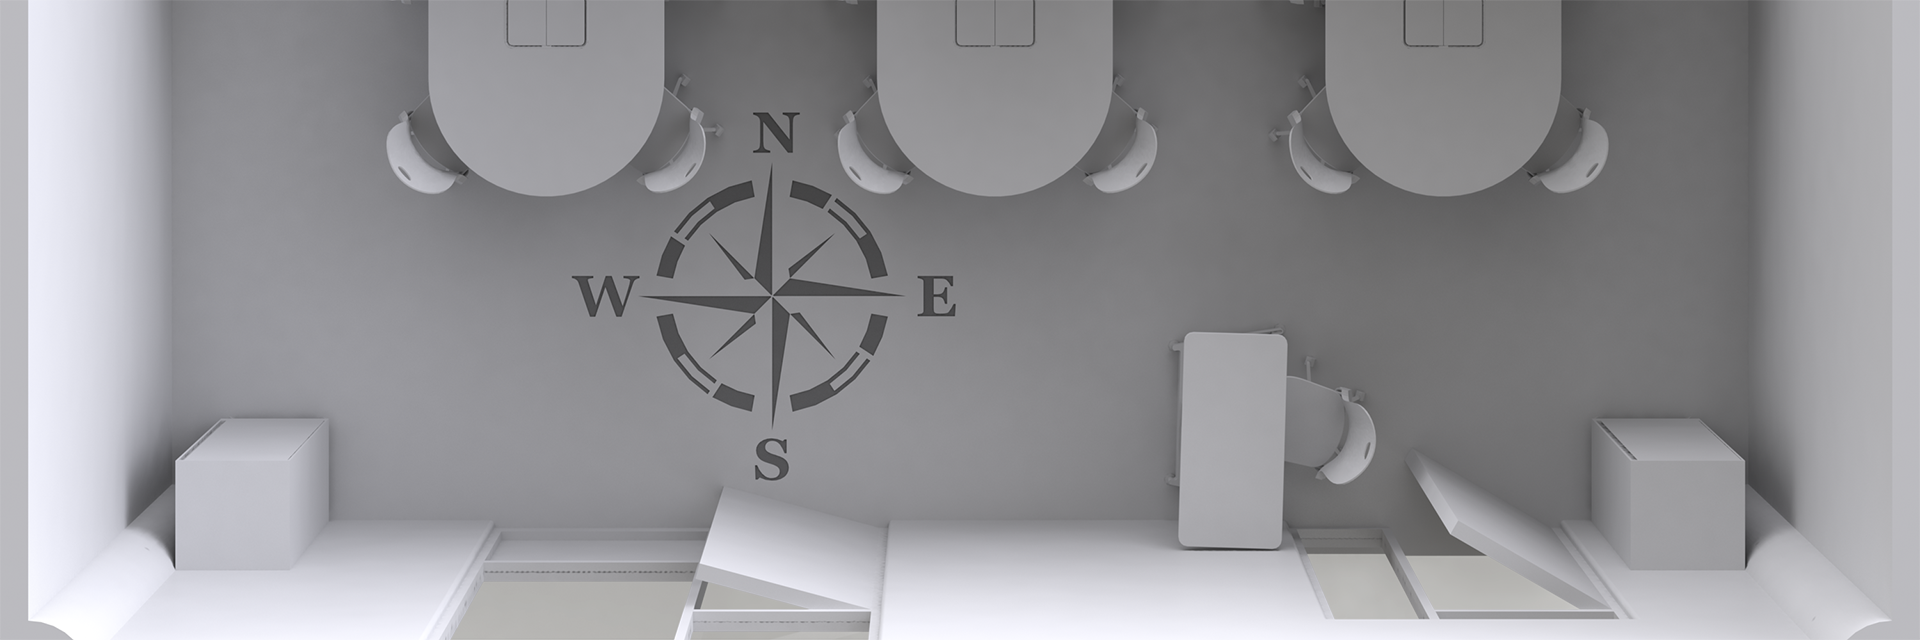 top down render of the lab with a compass rose 